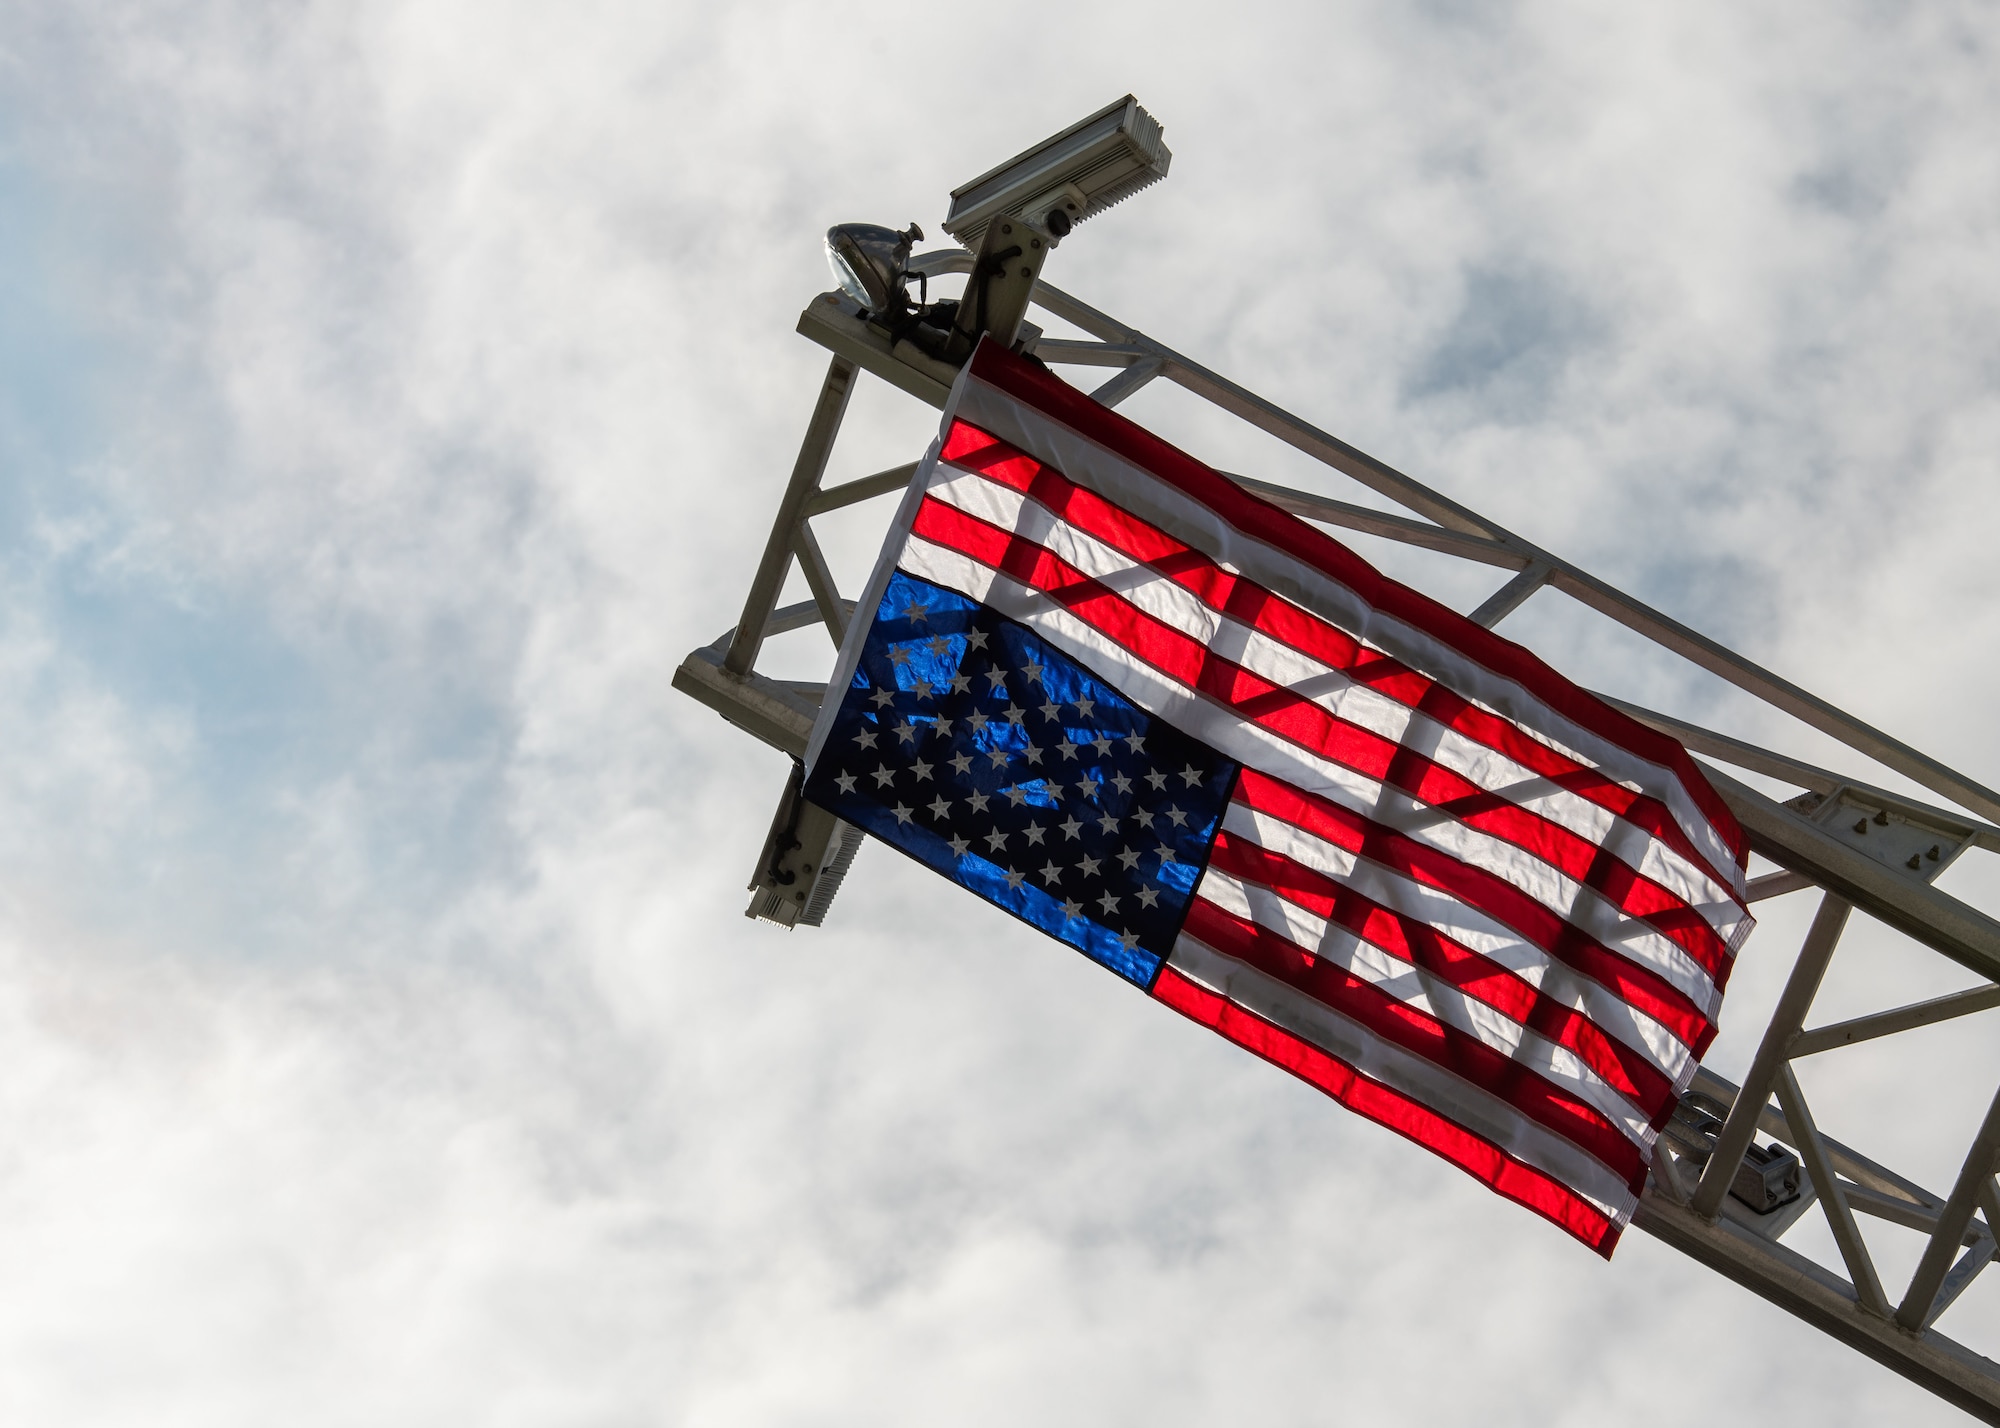 U.S. flag hangs from a fire truck aerial